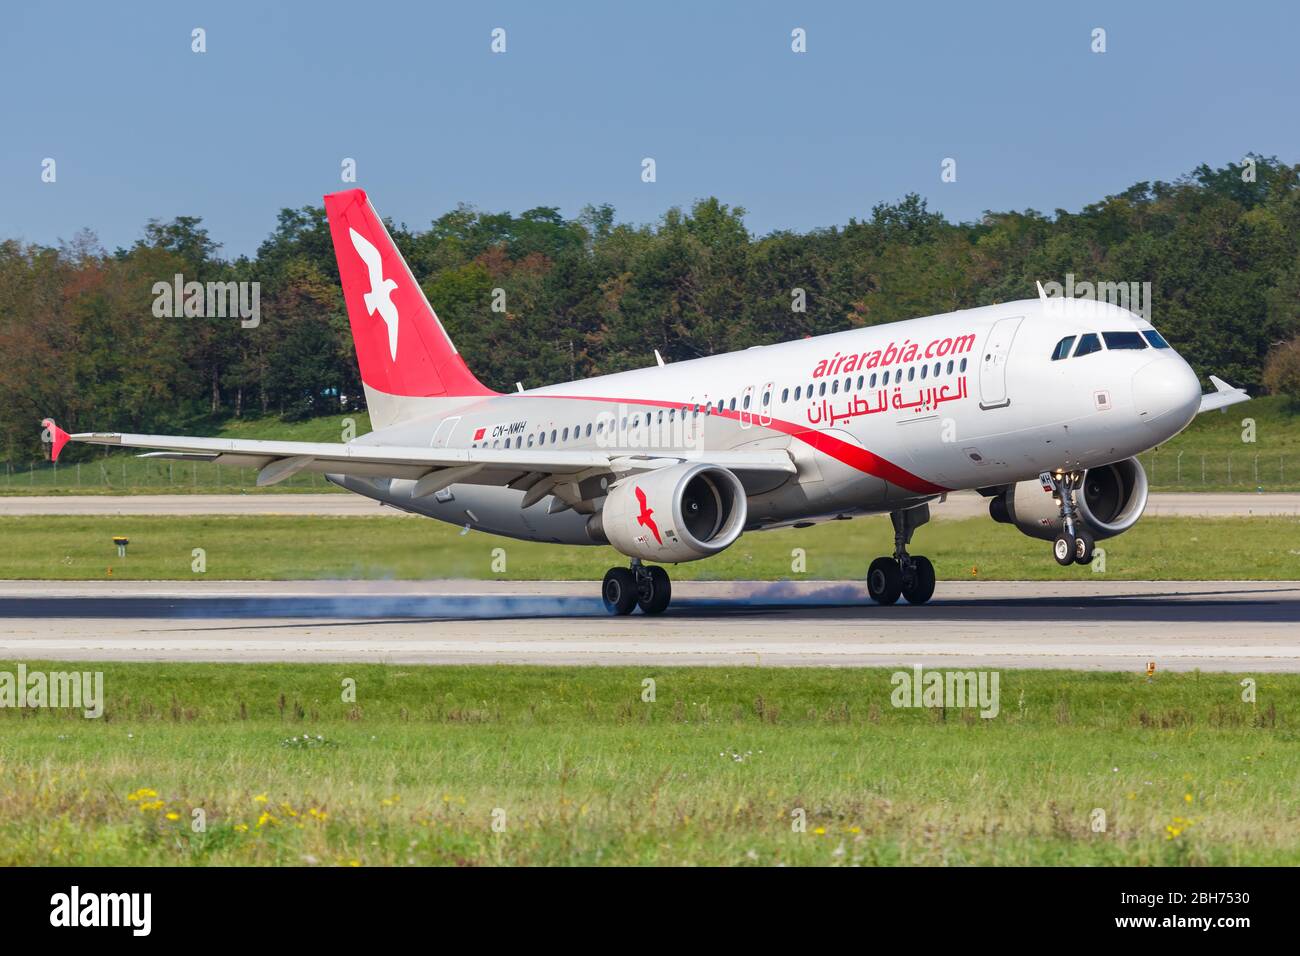 Mulhouse, France – August 31, 2019: Air Arabia Maroc Airbus A320 airplane at Basel Mulhouse airport (EAP) in France. Stock Photo